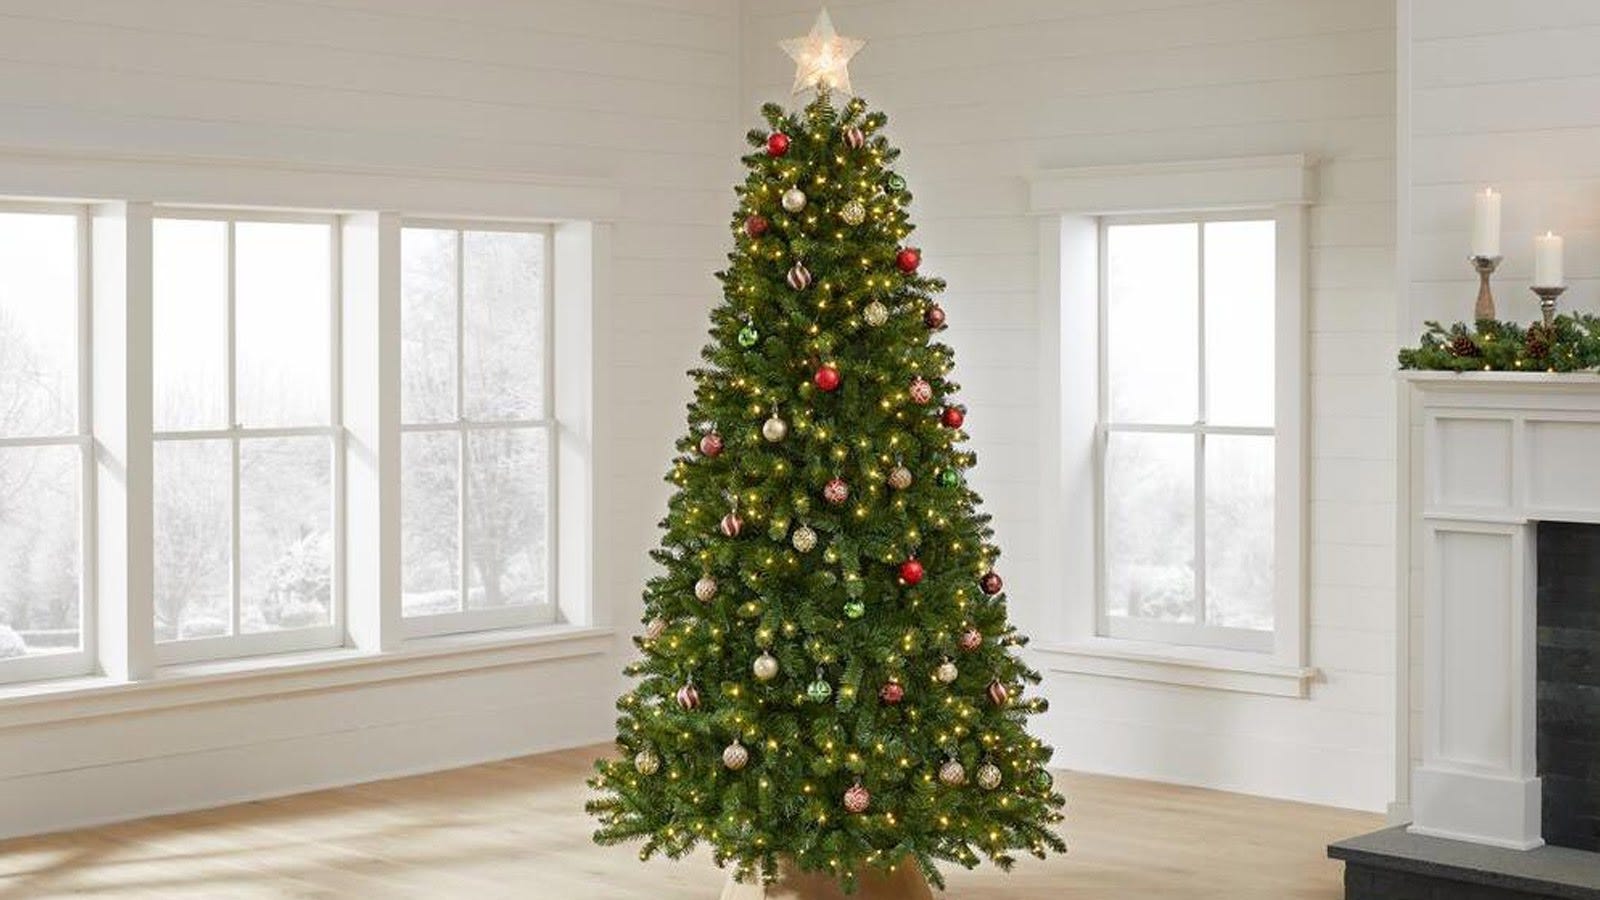 The Home Depot is having a huge sale on artificial Christmas trees